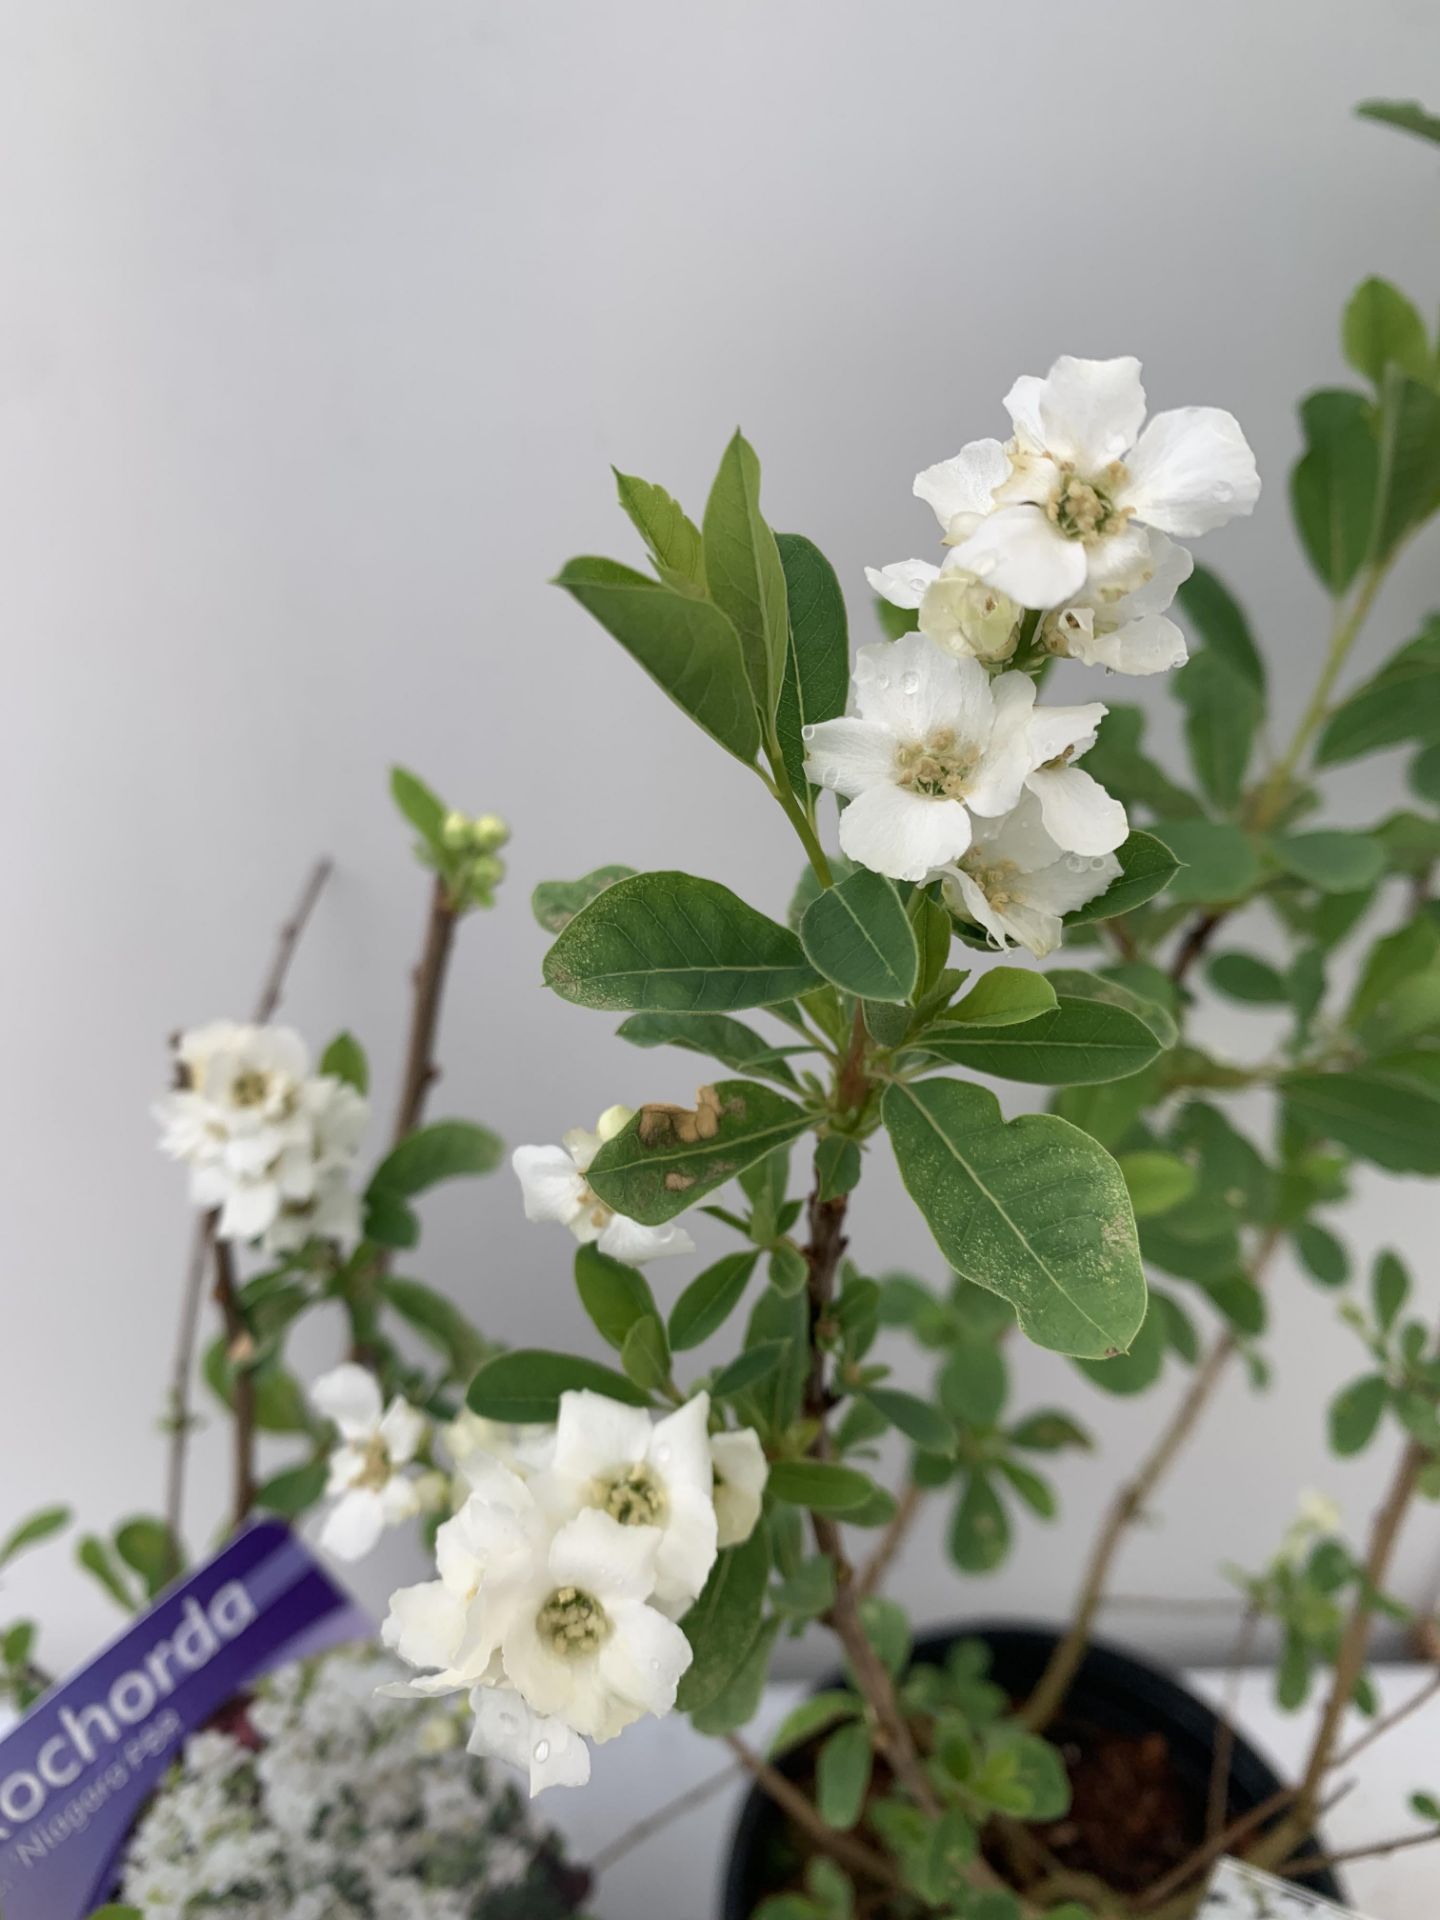 TWO EXOCHORDA RACEMOSA 'NIAGARA' IN 2 LTR POTS APPROX 65CM IN HEIGHT PLUS VAT TO BE SOLD FOR THE TWO - Image 10 of 11